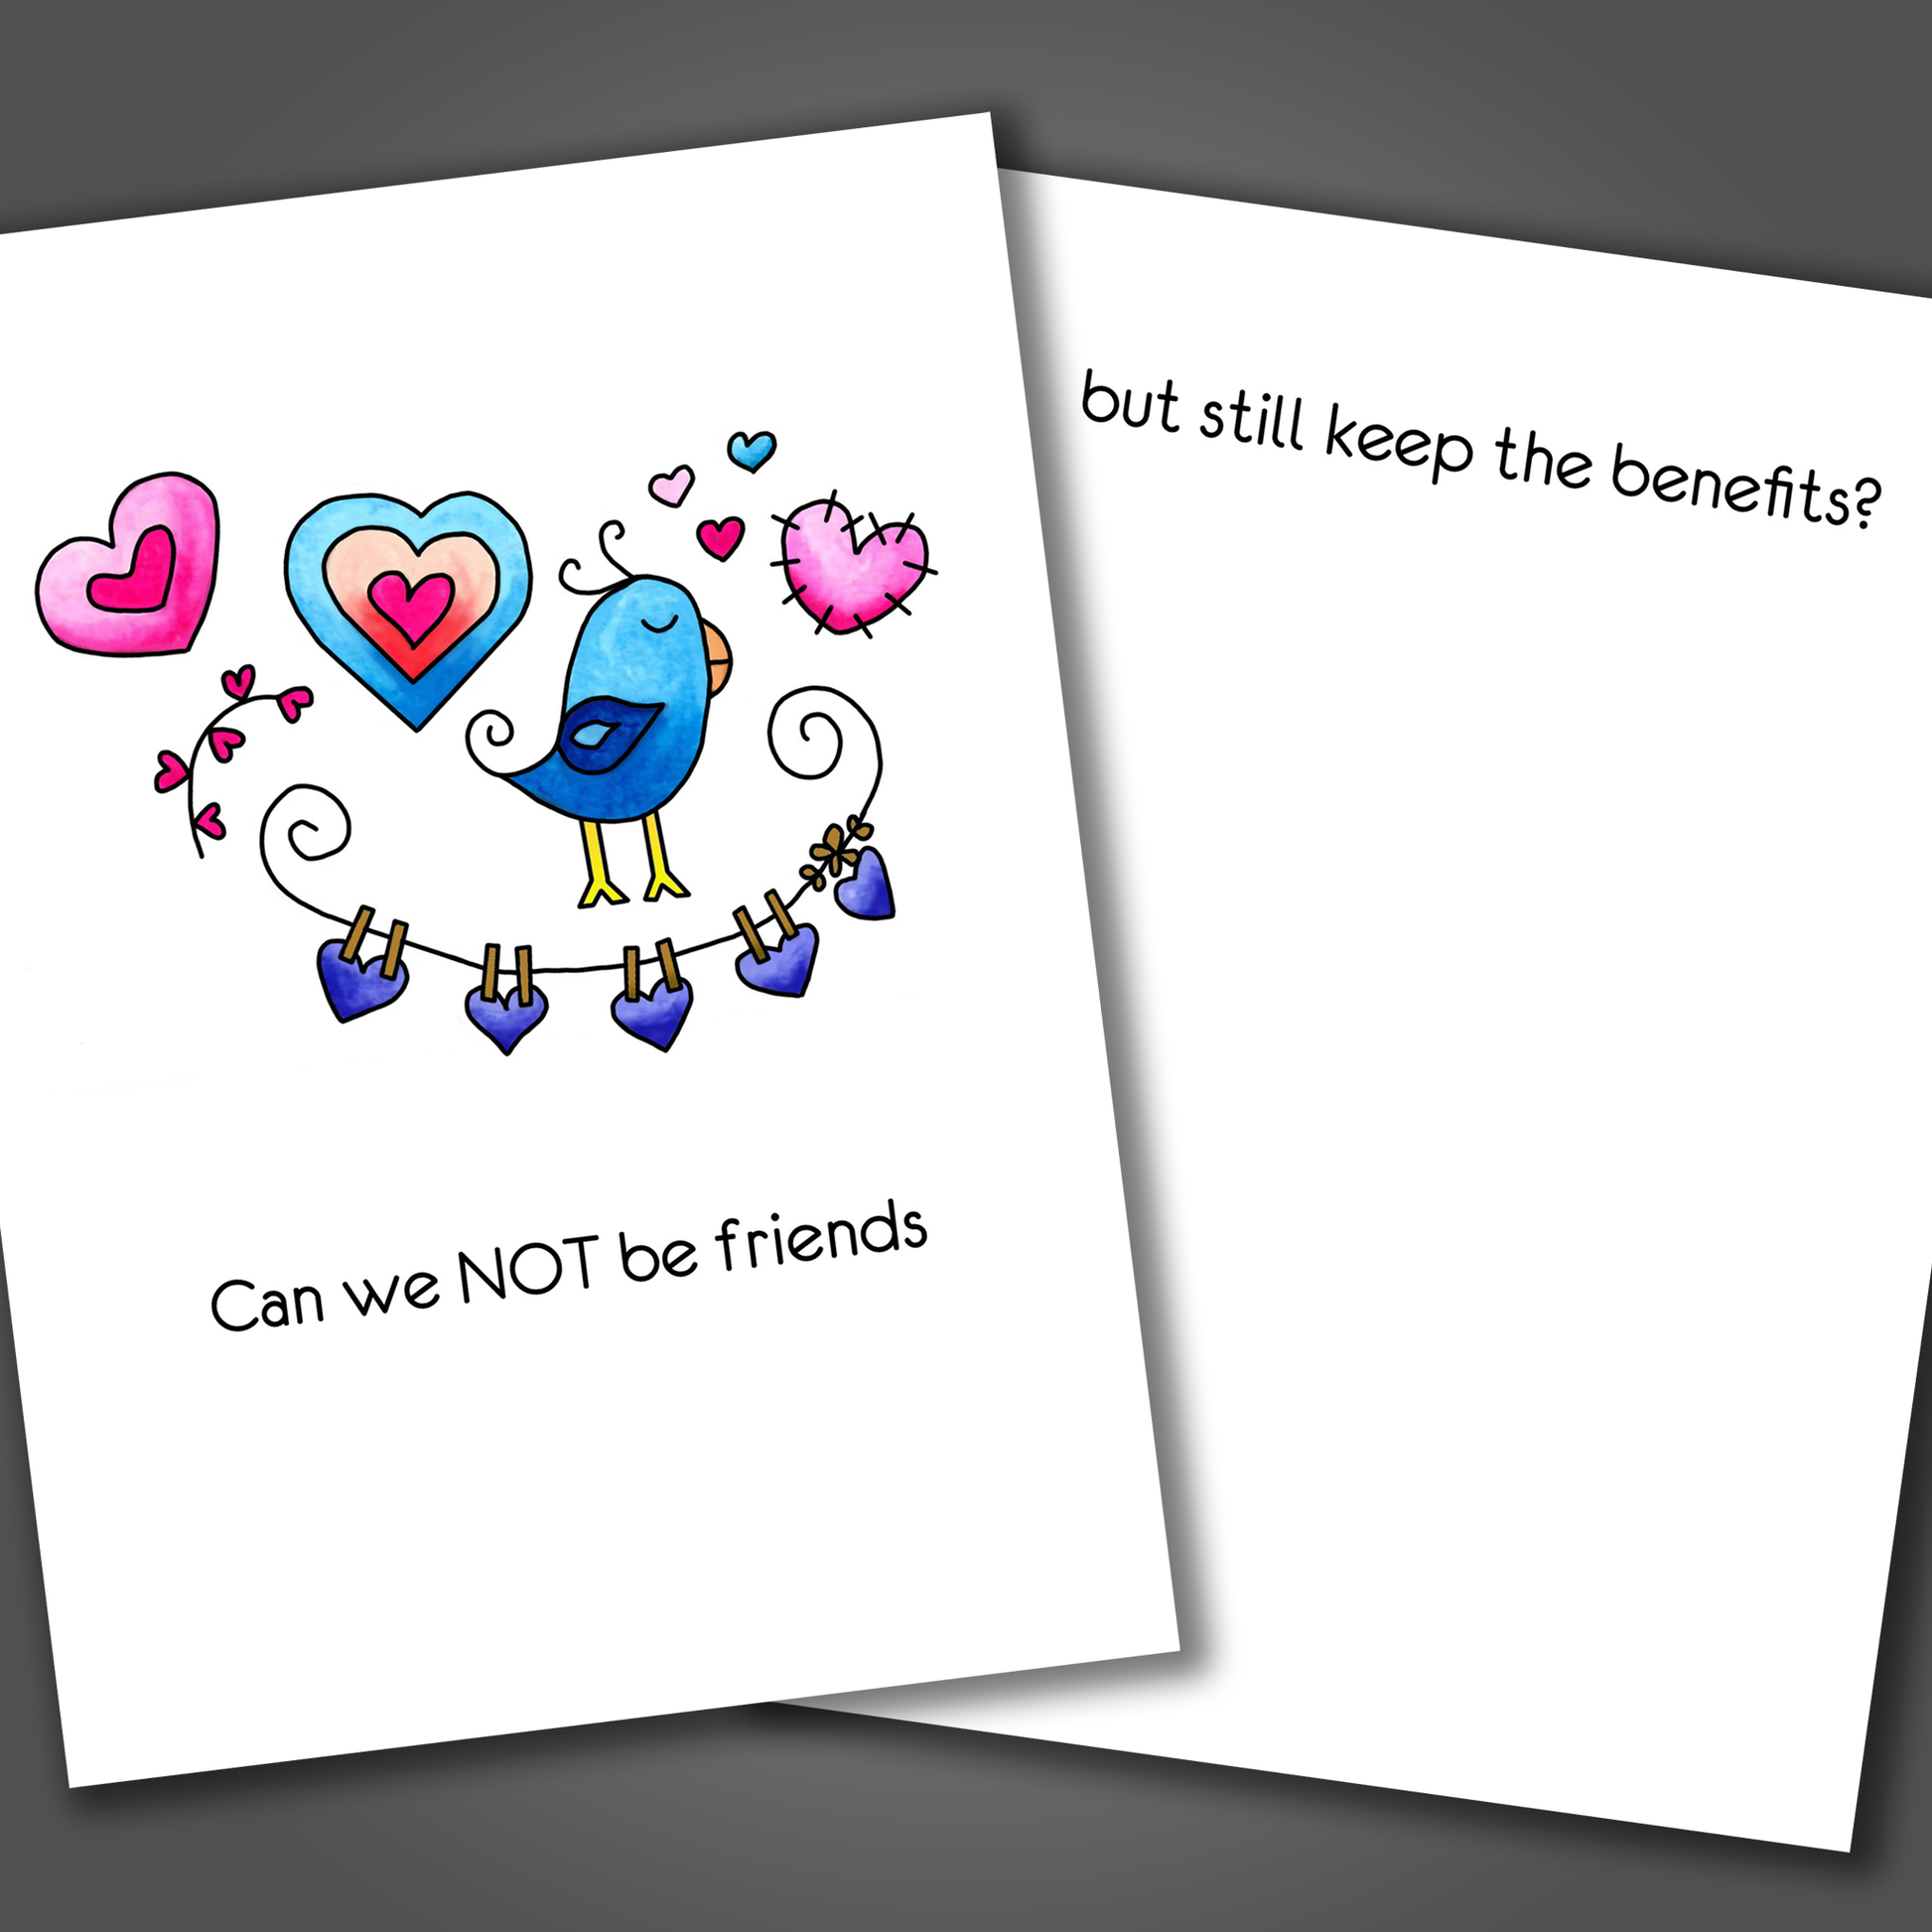 Funny divorce or break-up card with a bird and hearts drawn on the front of the card. Inside the card is a joke that says can we still keep the benefits?